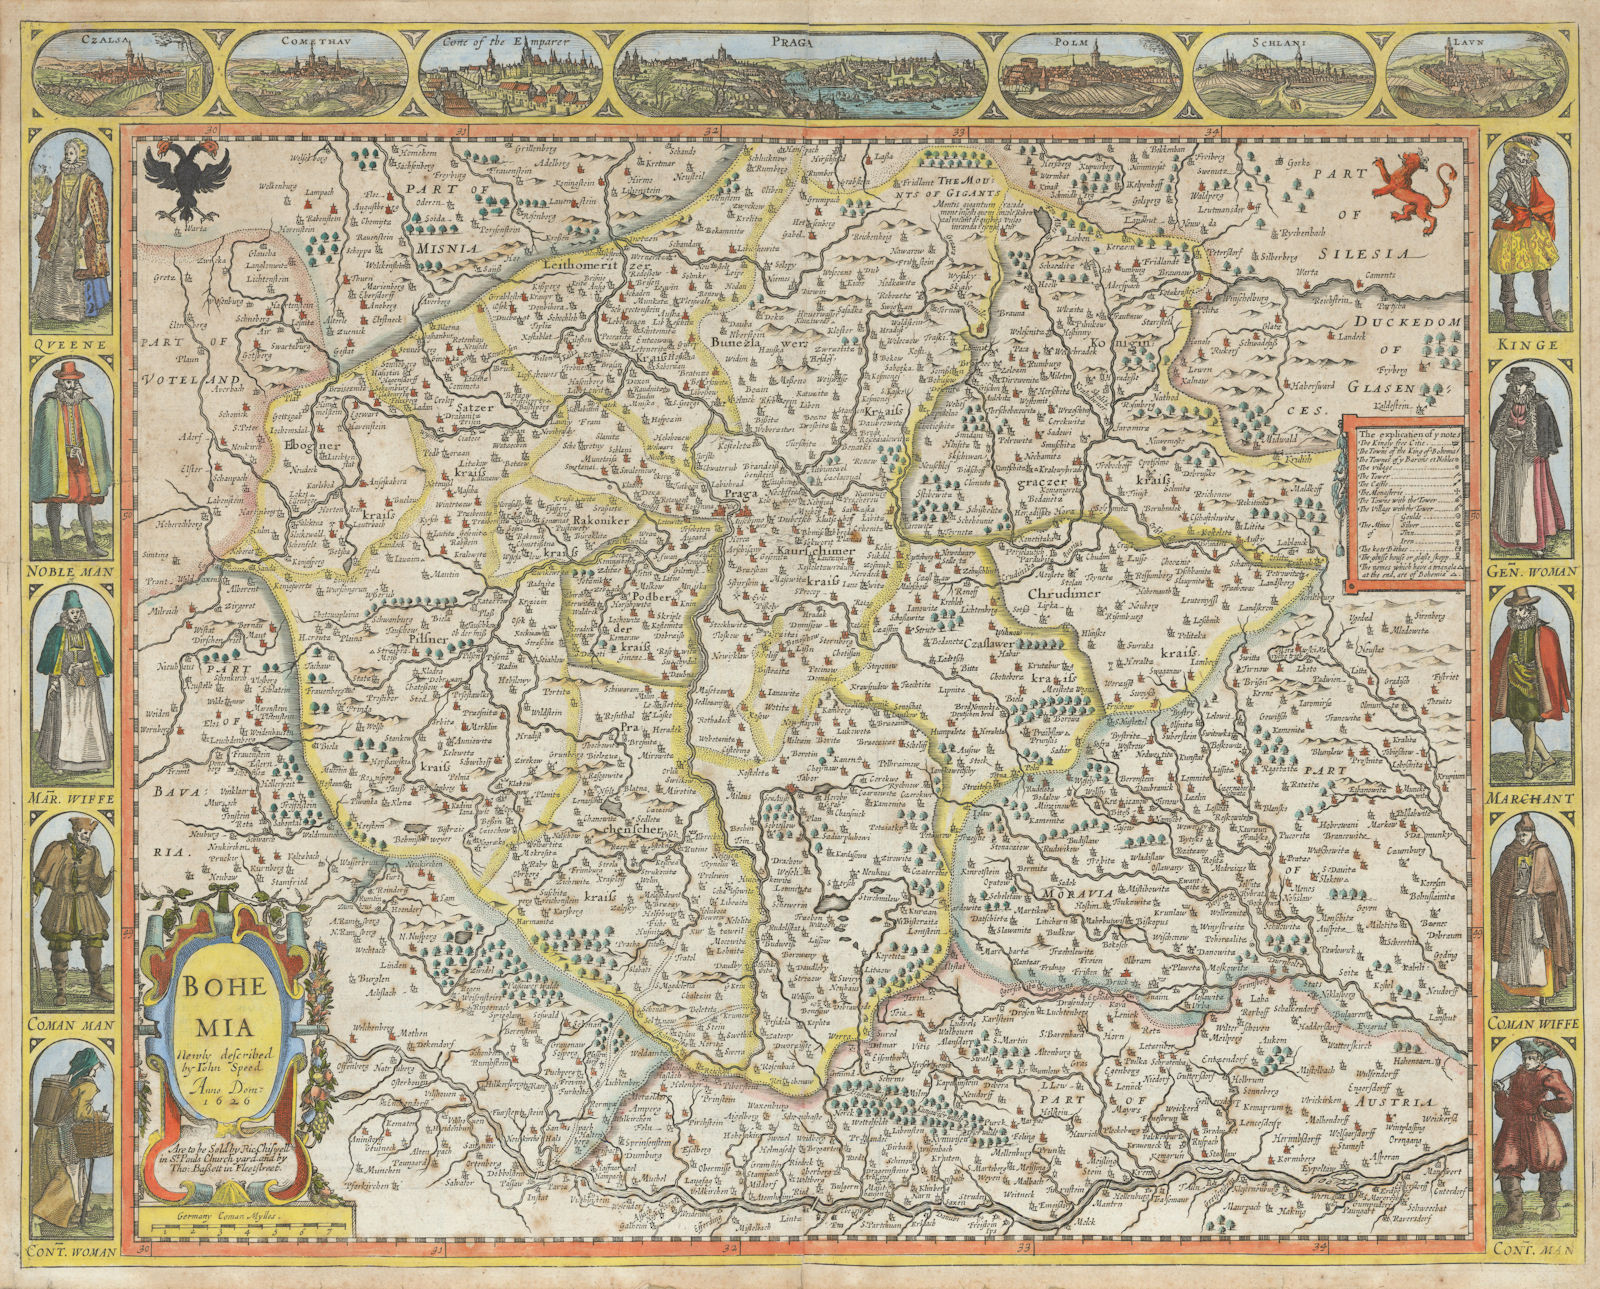 Bohemia Newly described by John Speed… 1626. Bassett/Chiswell edition 1676 map